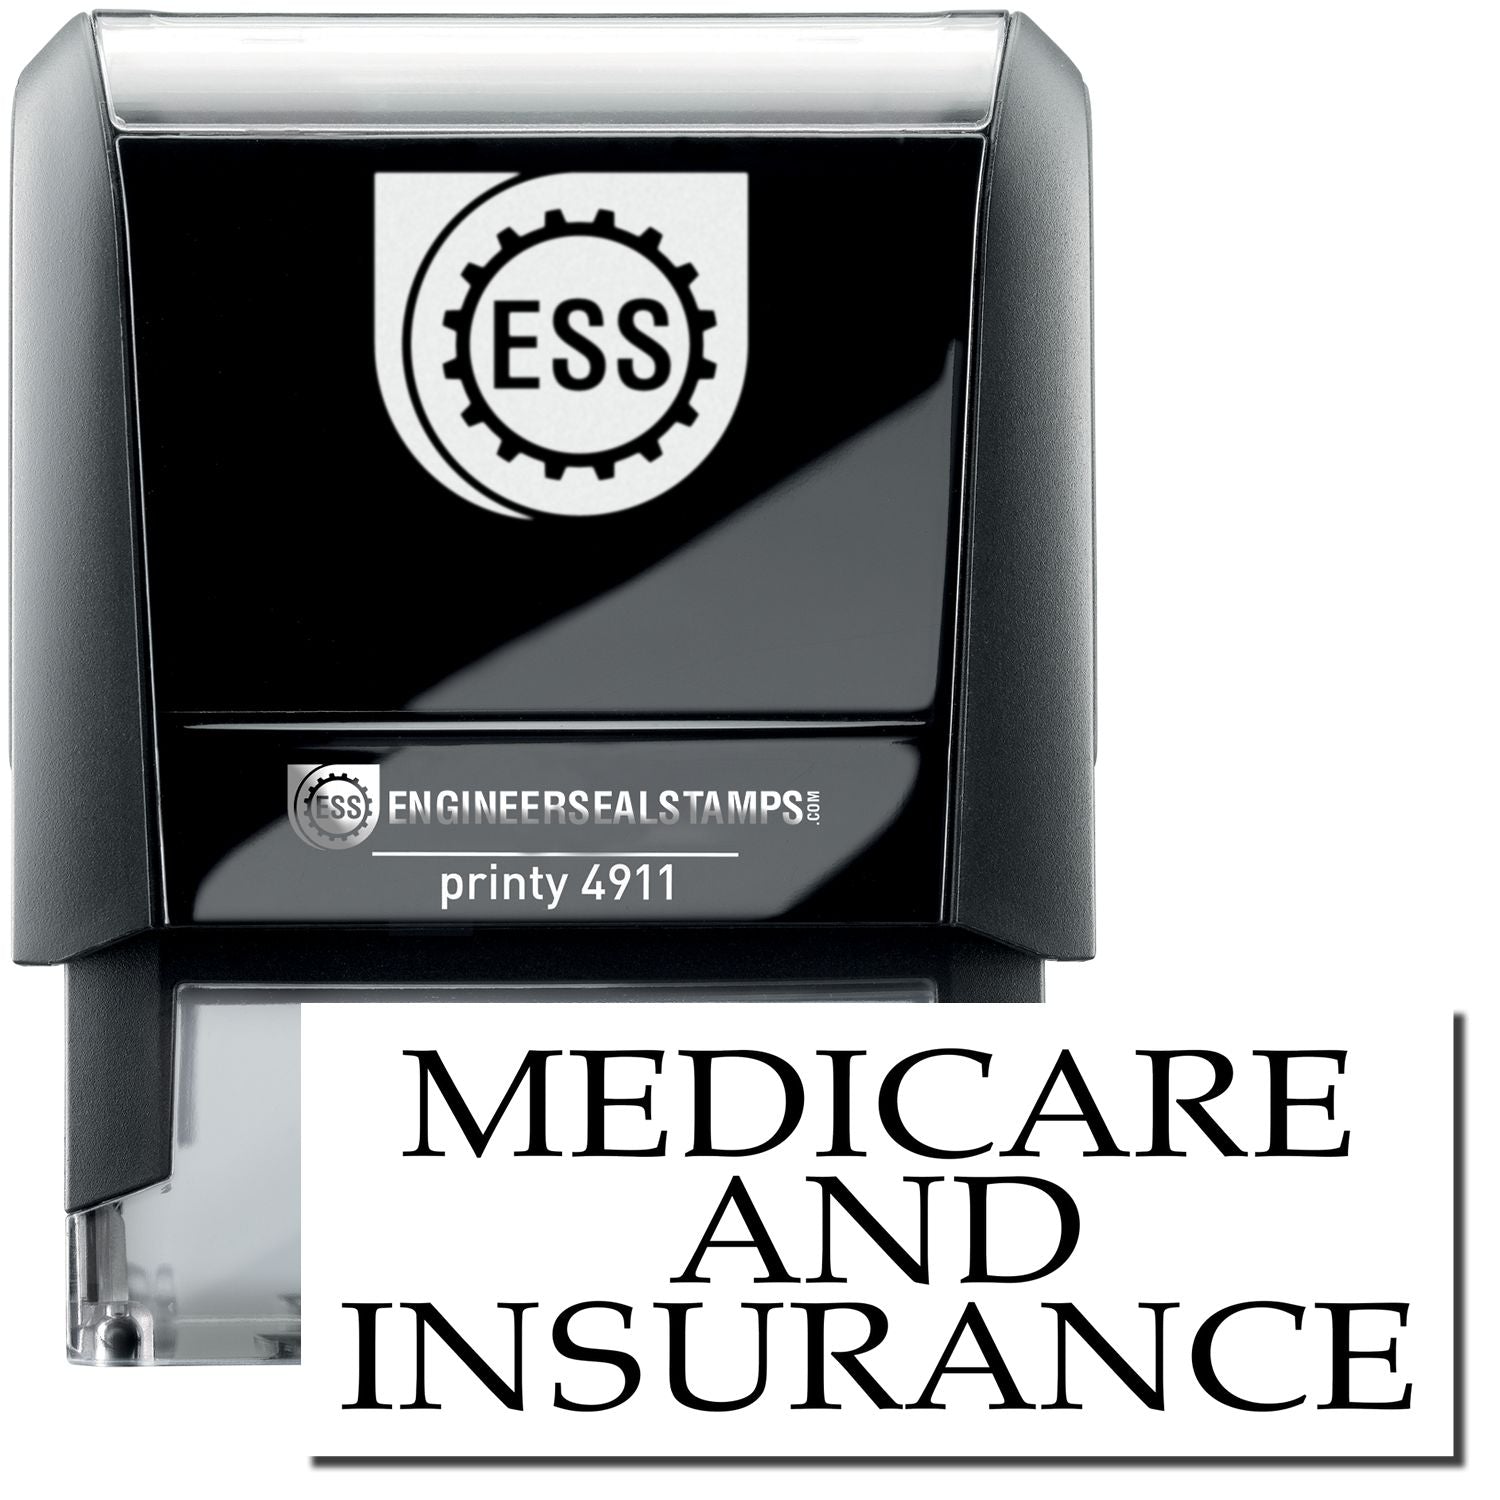 A self-inking stamp with a stamped image showing how the text "MEDICARE AND INSURANCE" is displayed after stamping.